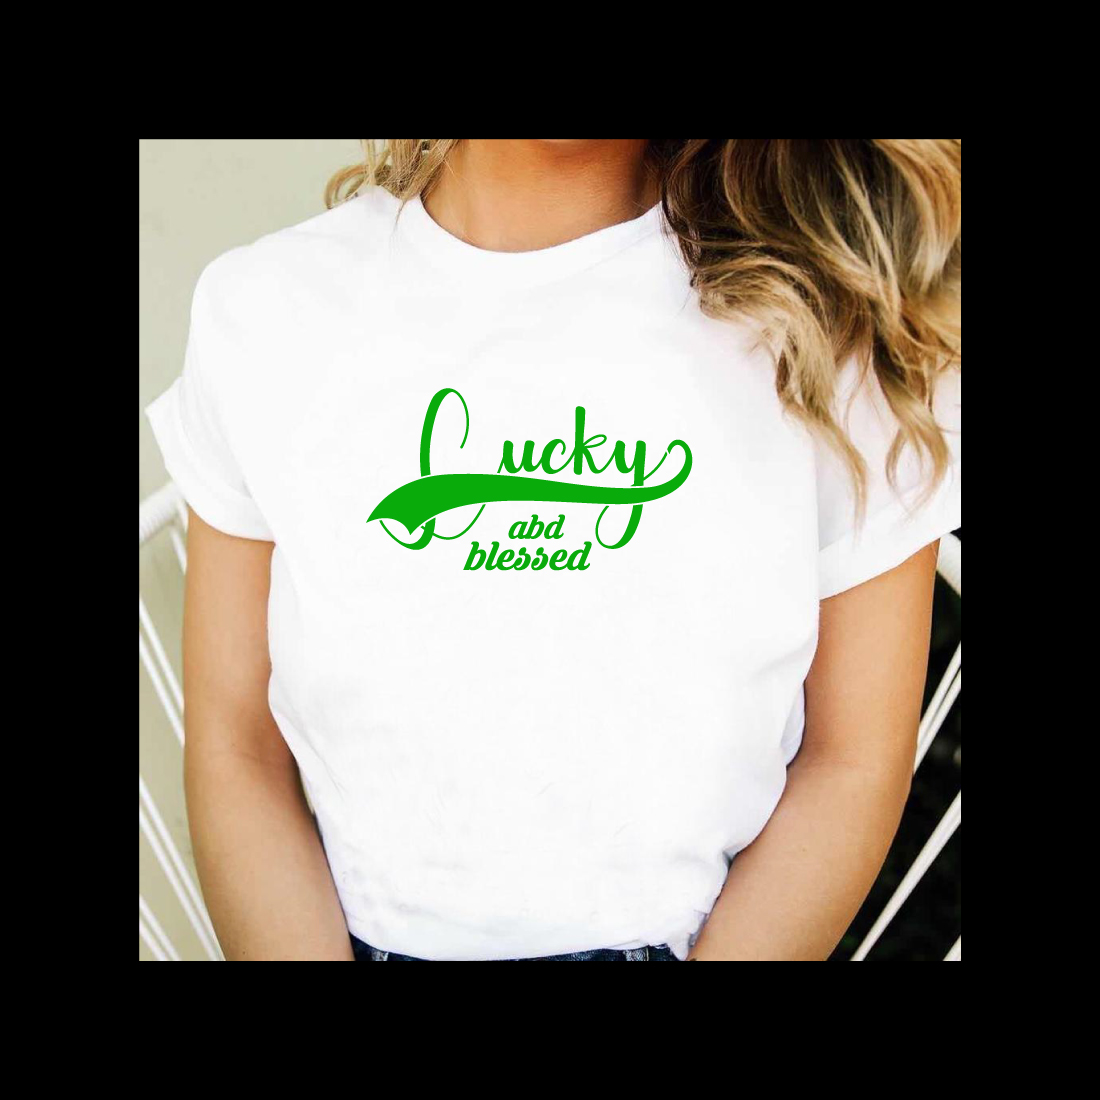 Woman wearing a white t - shirt with green lettering.